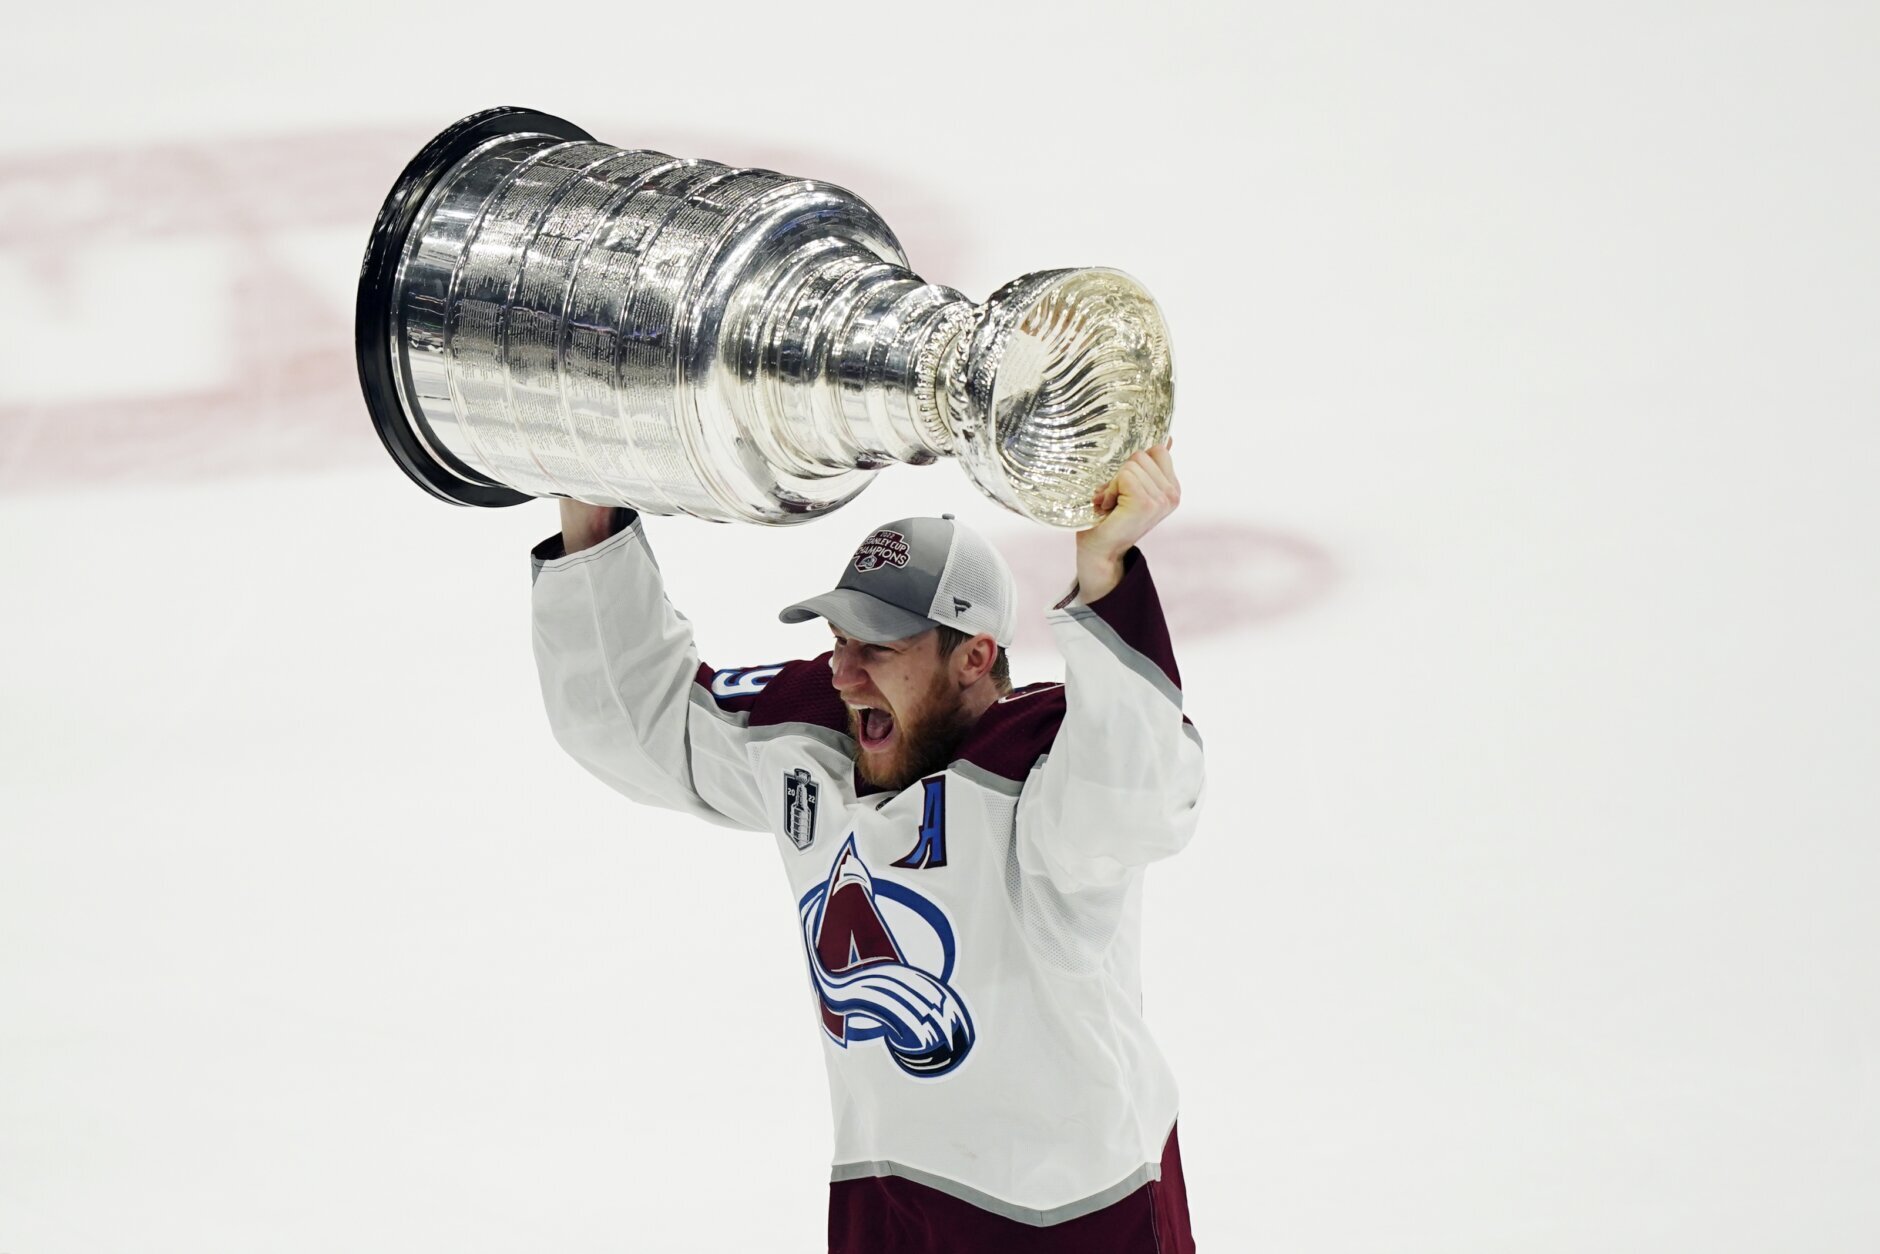 https://wtop.com/wp-content/uploads/2022/06/Stanley_Cup_Avalanche_Lightning_Hockey_88500-1880x1254.jpg